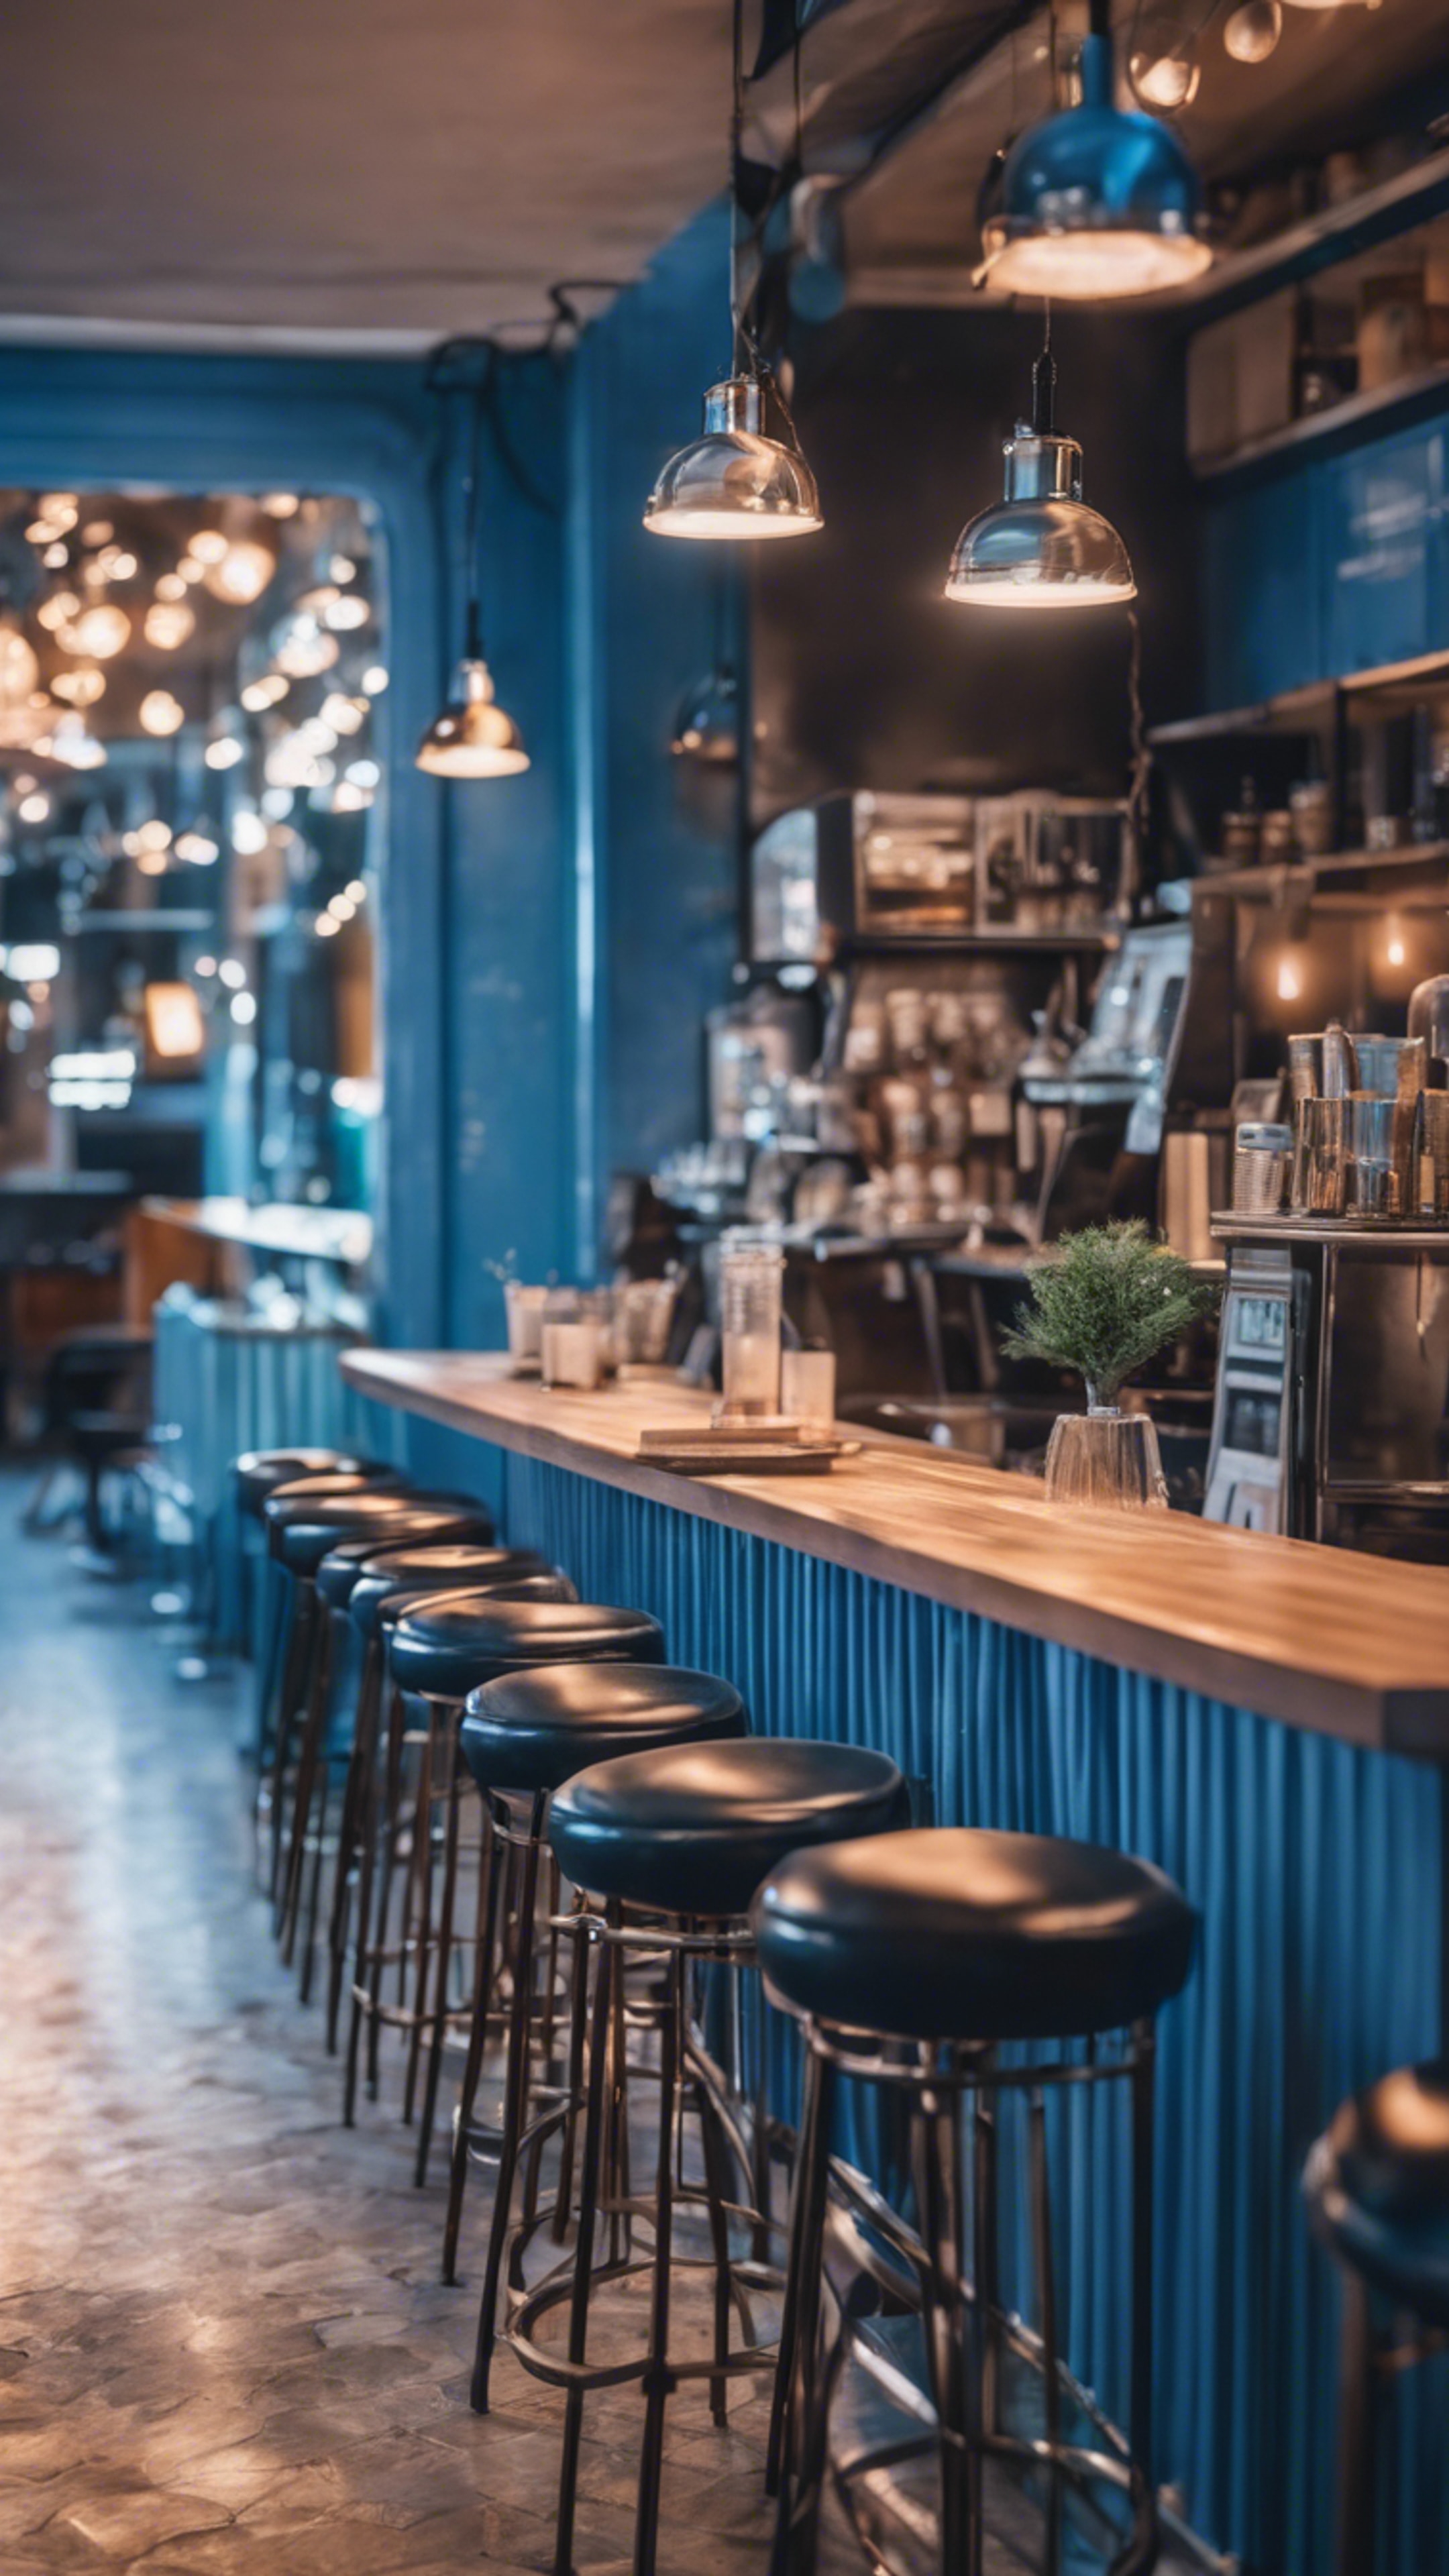 A chic urban cafe with cool blue interiors in the evening Tapeet[a944bfd98f8948b498de]